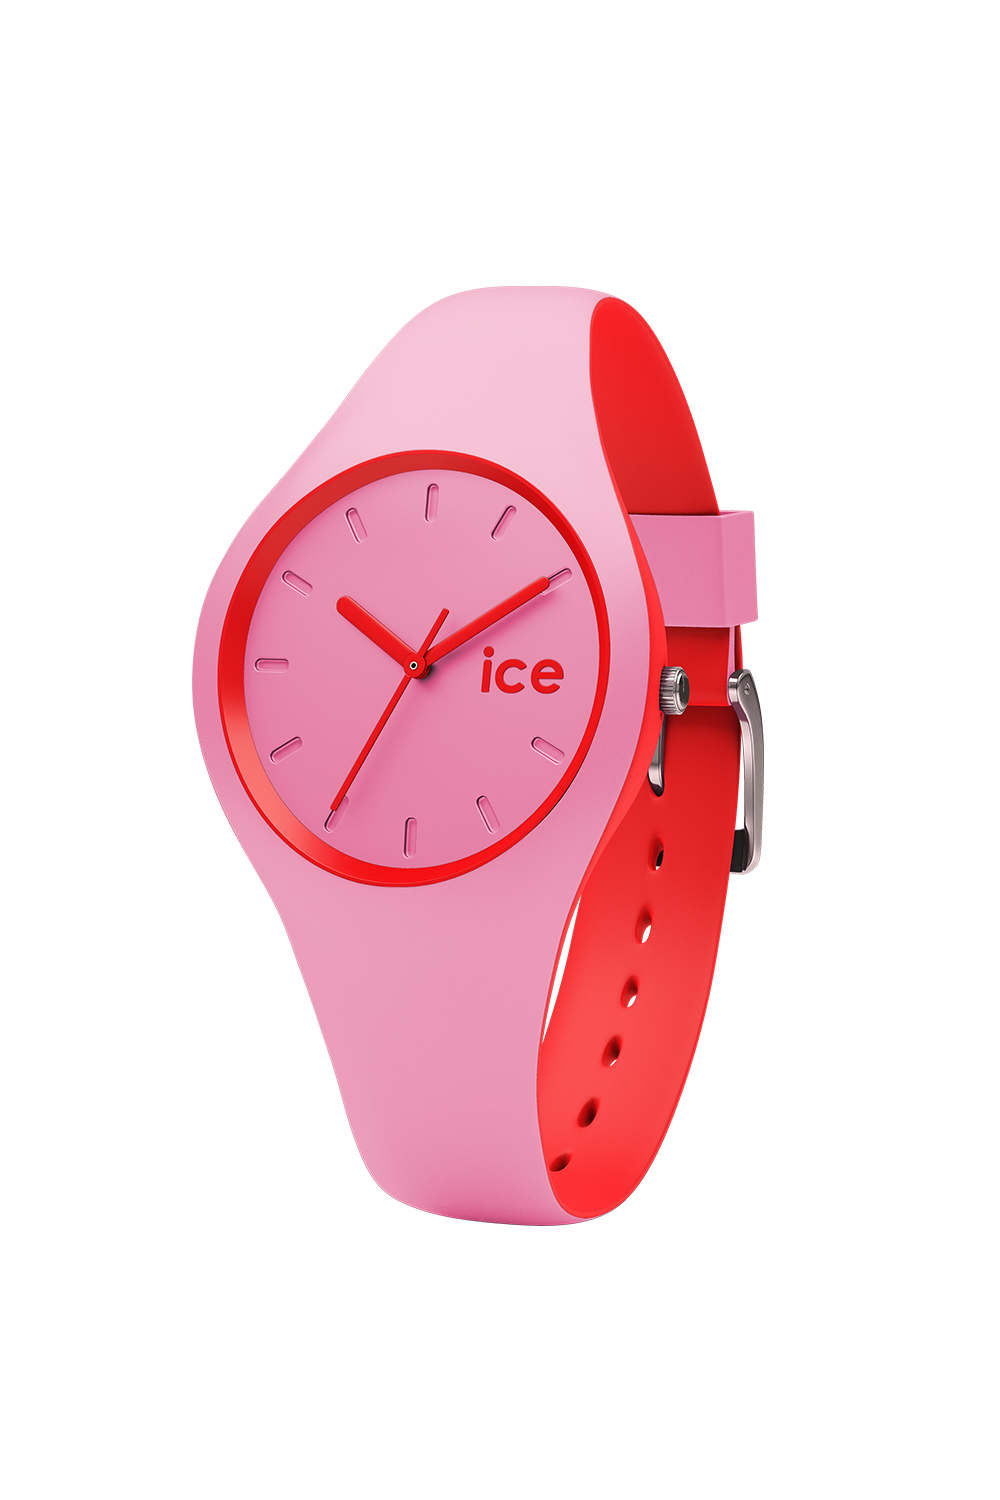 Watch, $149, by Ice Watch.